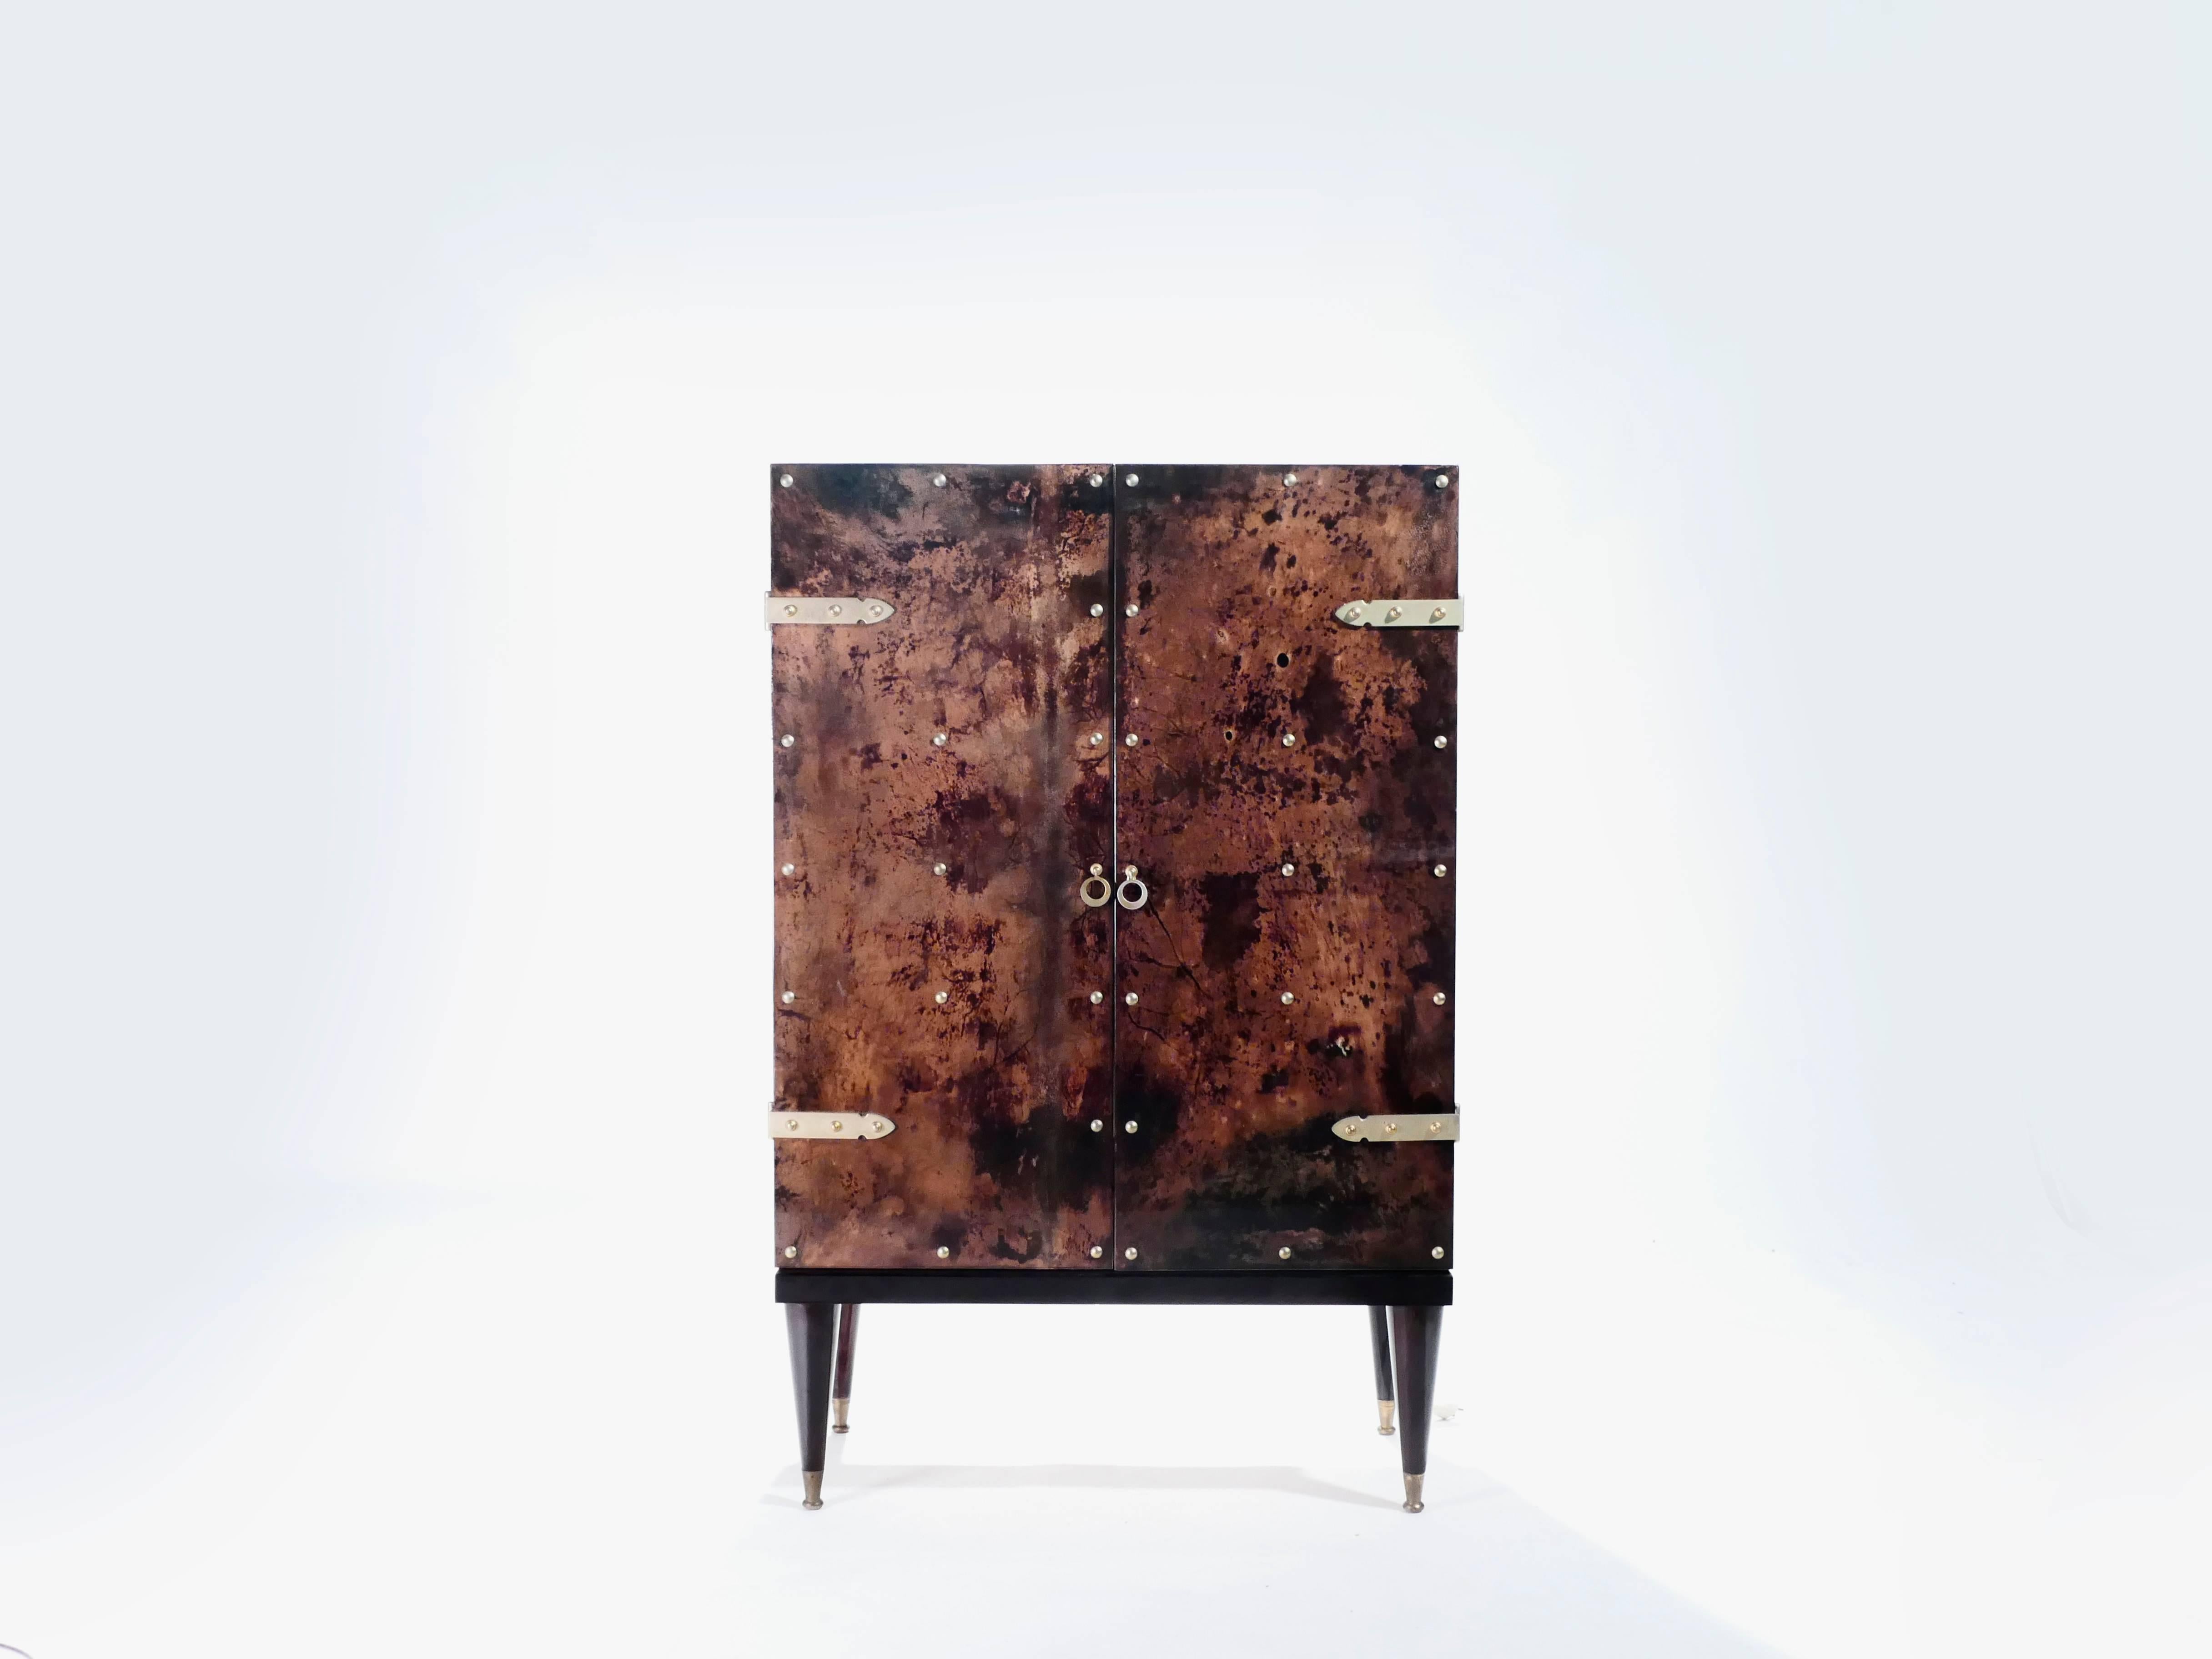 Italian designer Aldo Tura was known for creating decorative pieces that often incorporated goatskin parchment, which creates the lovely dappled, tortoise-shell-like look seen here on this bar cabinet. The varnished goatskin parchment surface, in